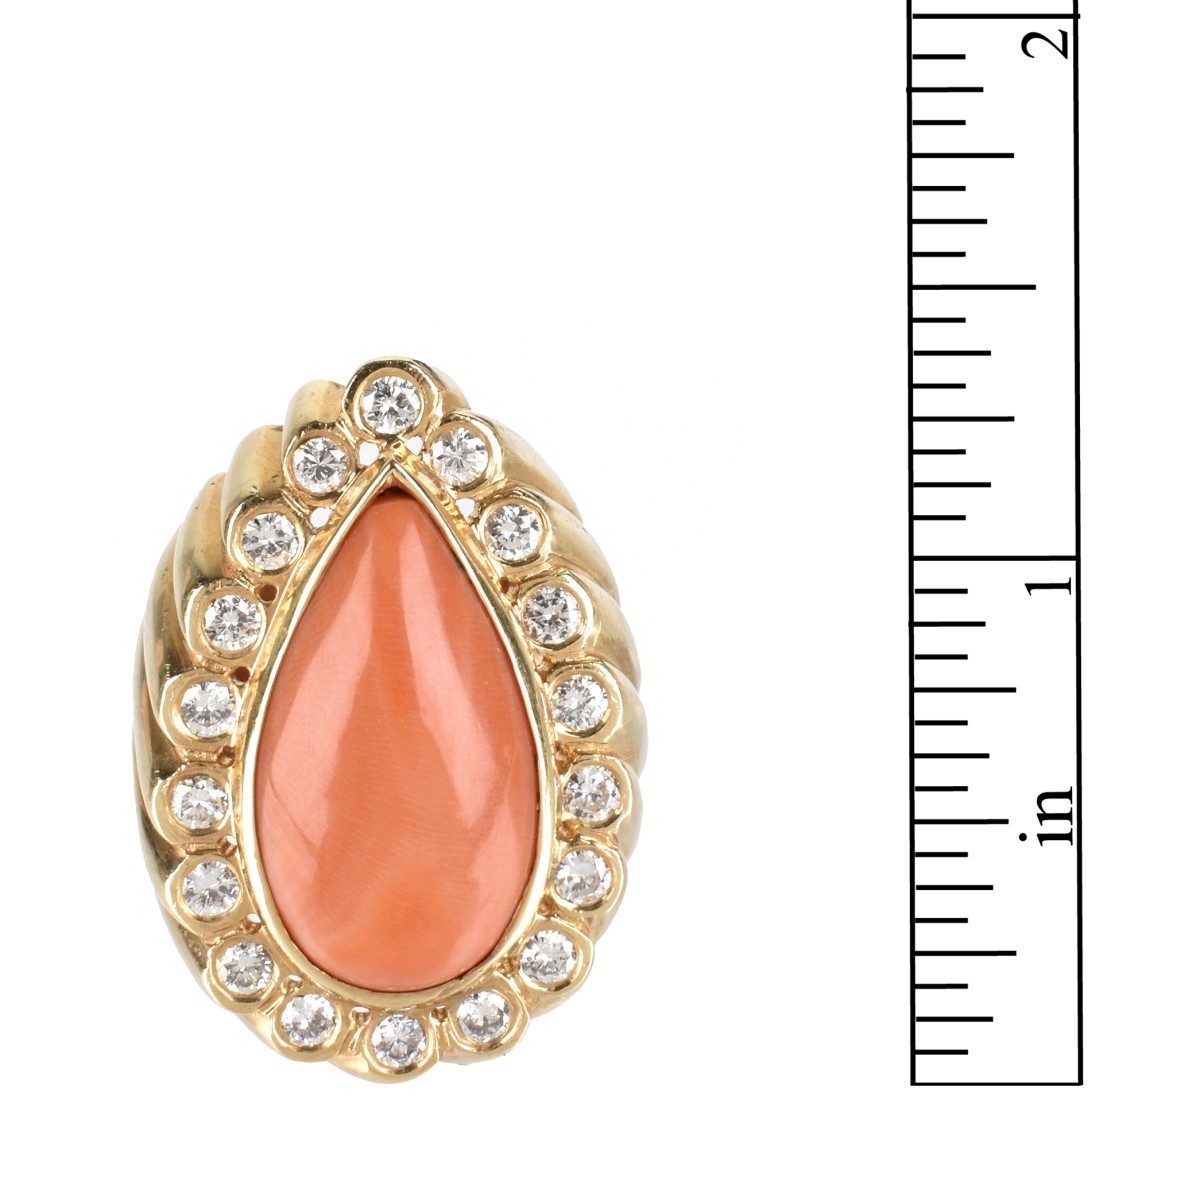 Diamond, Red Coral and 14K Ring